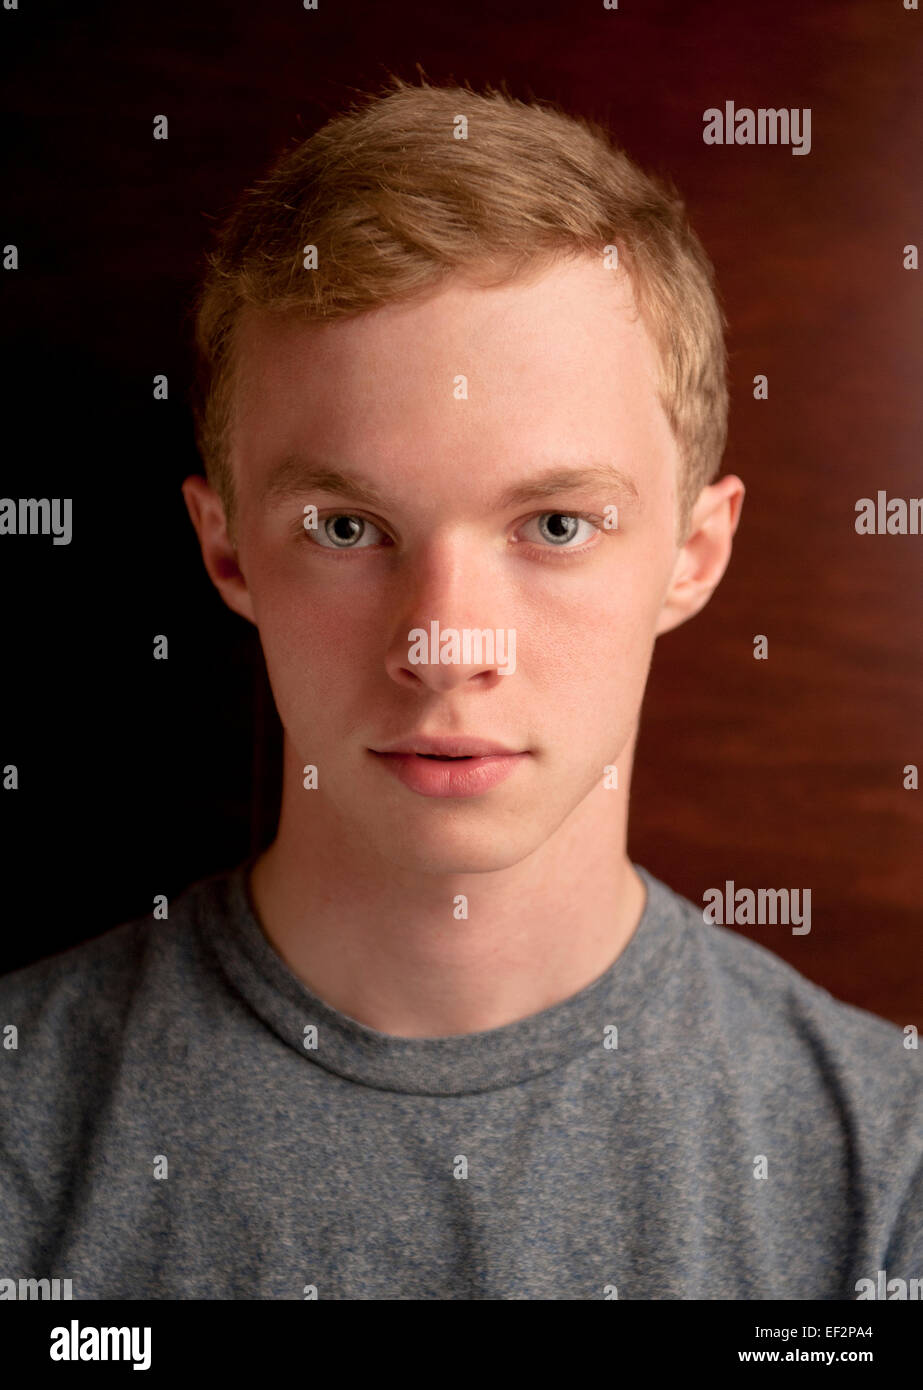 A head shot portrait of a young man 19 nineteen years old, White Caucasian Male. Stock Photo